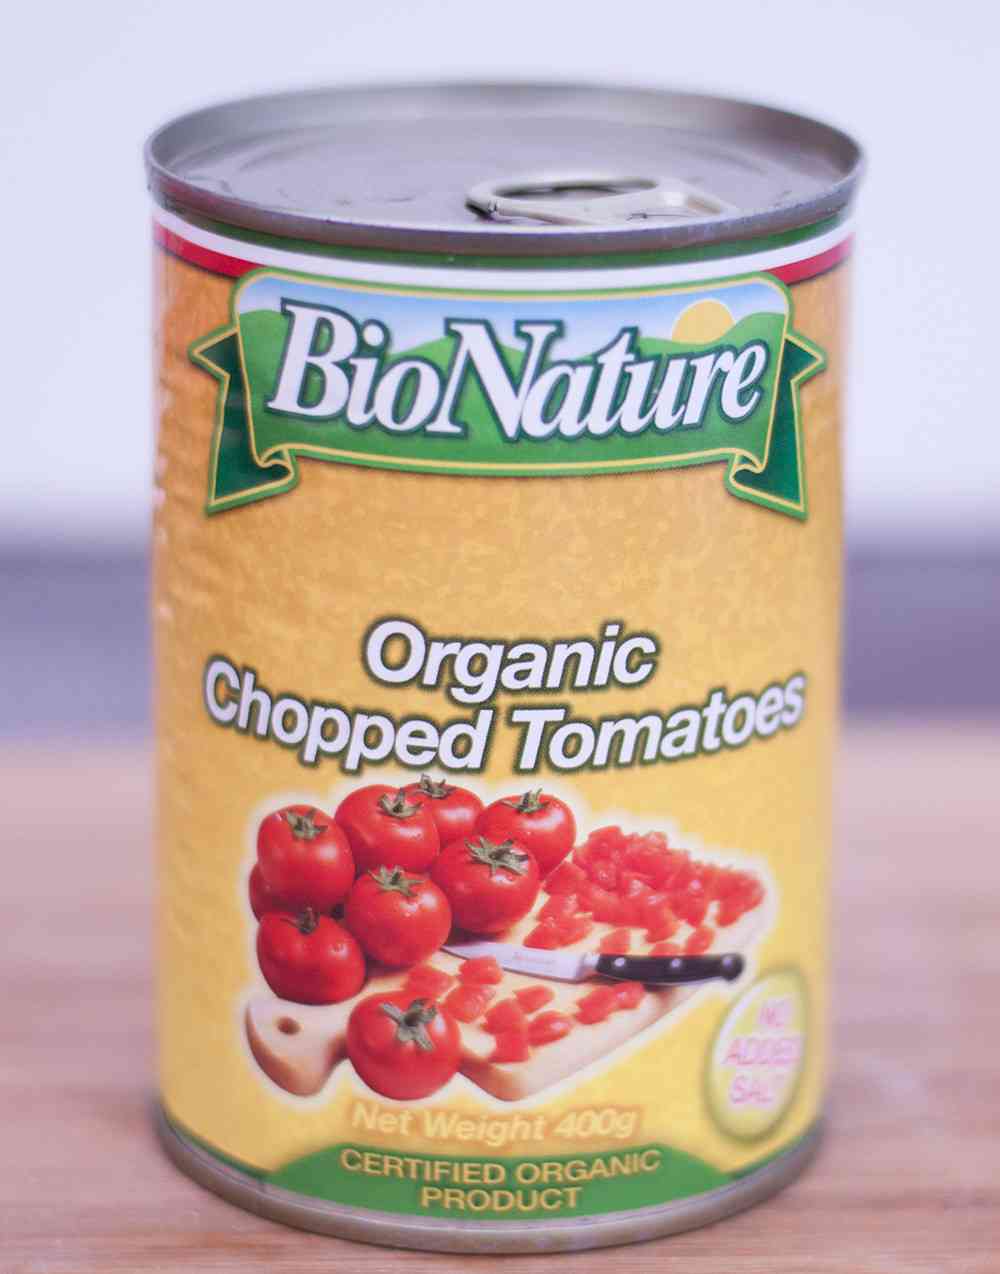 Chopped tomatoes packaged